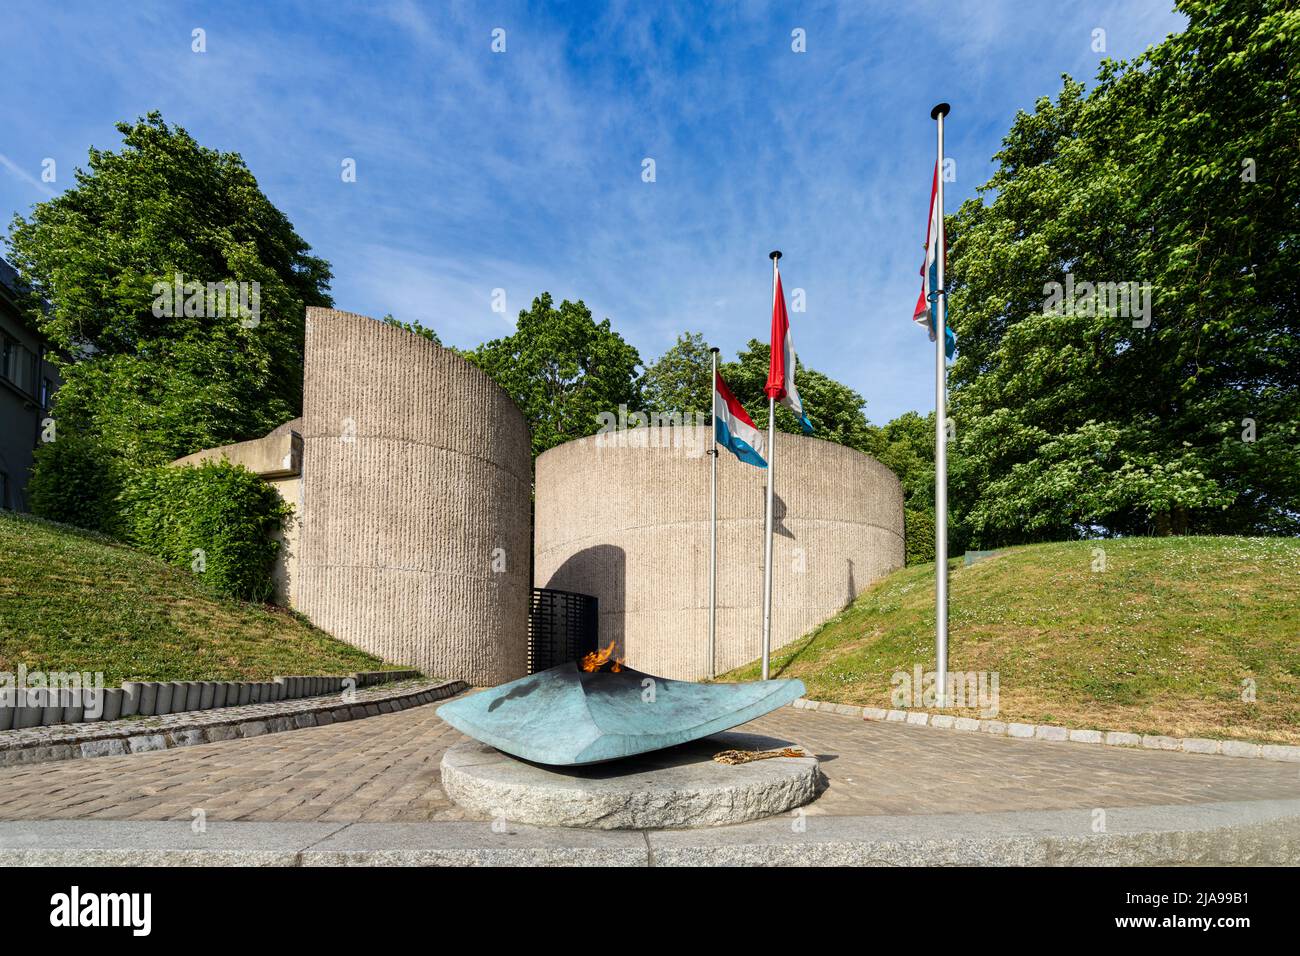 Luxembourg city, May 2022.  view of the Monument National de la Solidarité Luxembourgeoise in a city center park Stock Photo